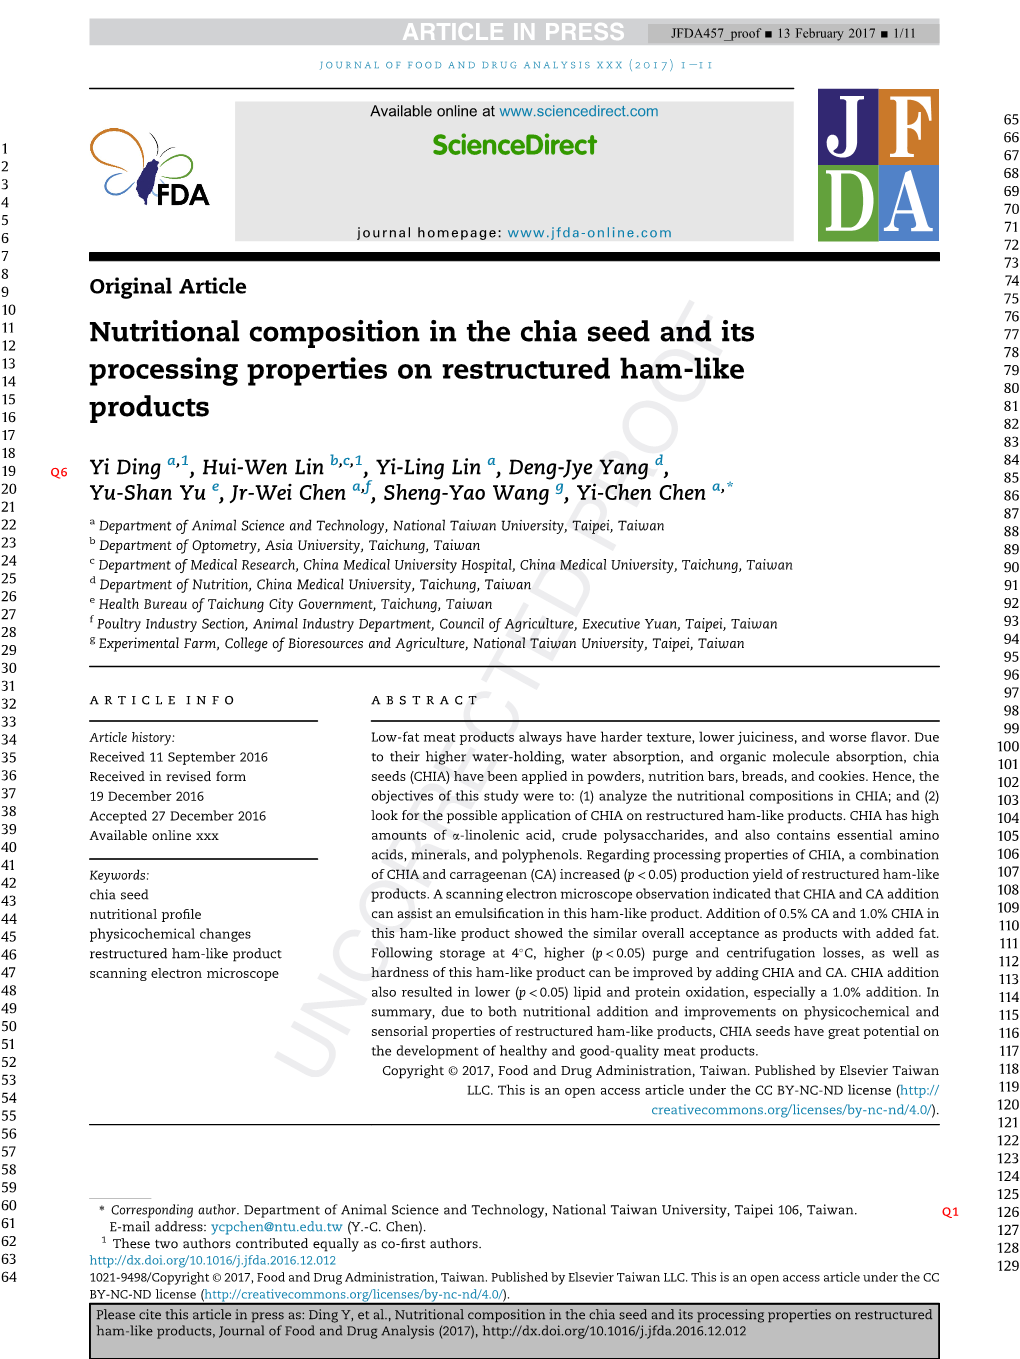 Nutritional Composition in the Chia Seed and Its Processing Properties on Restructured Ham-Like Products